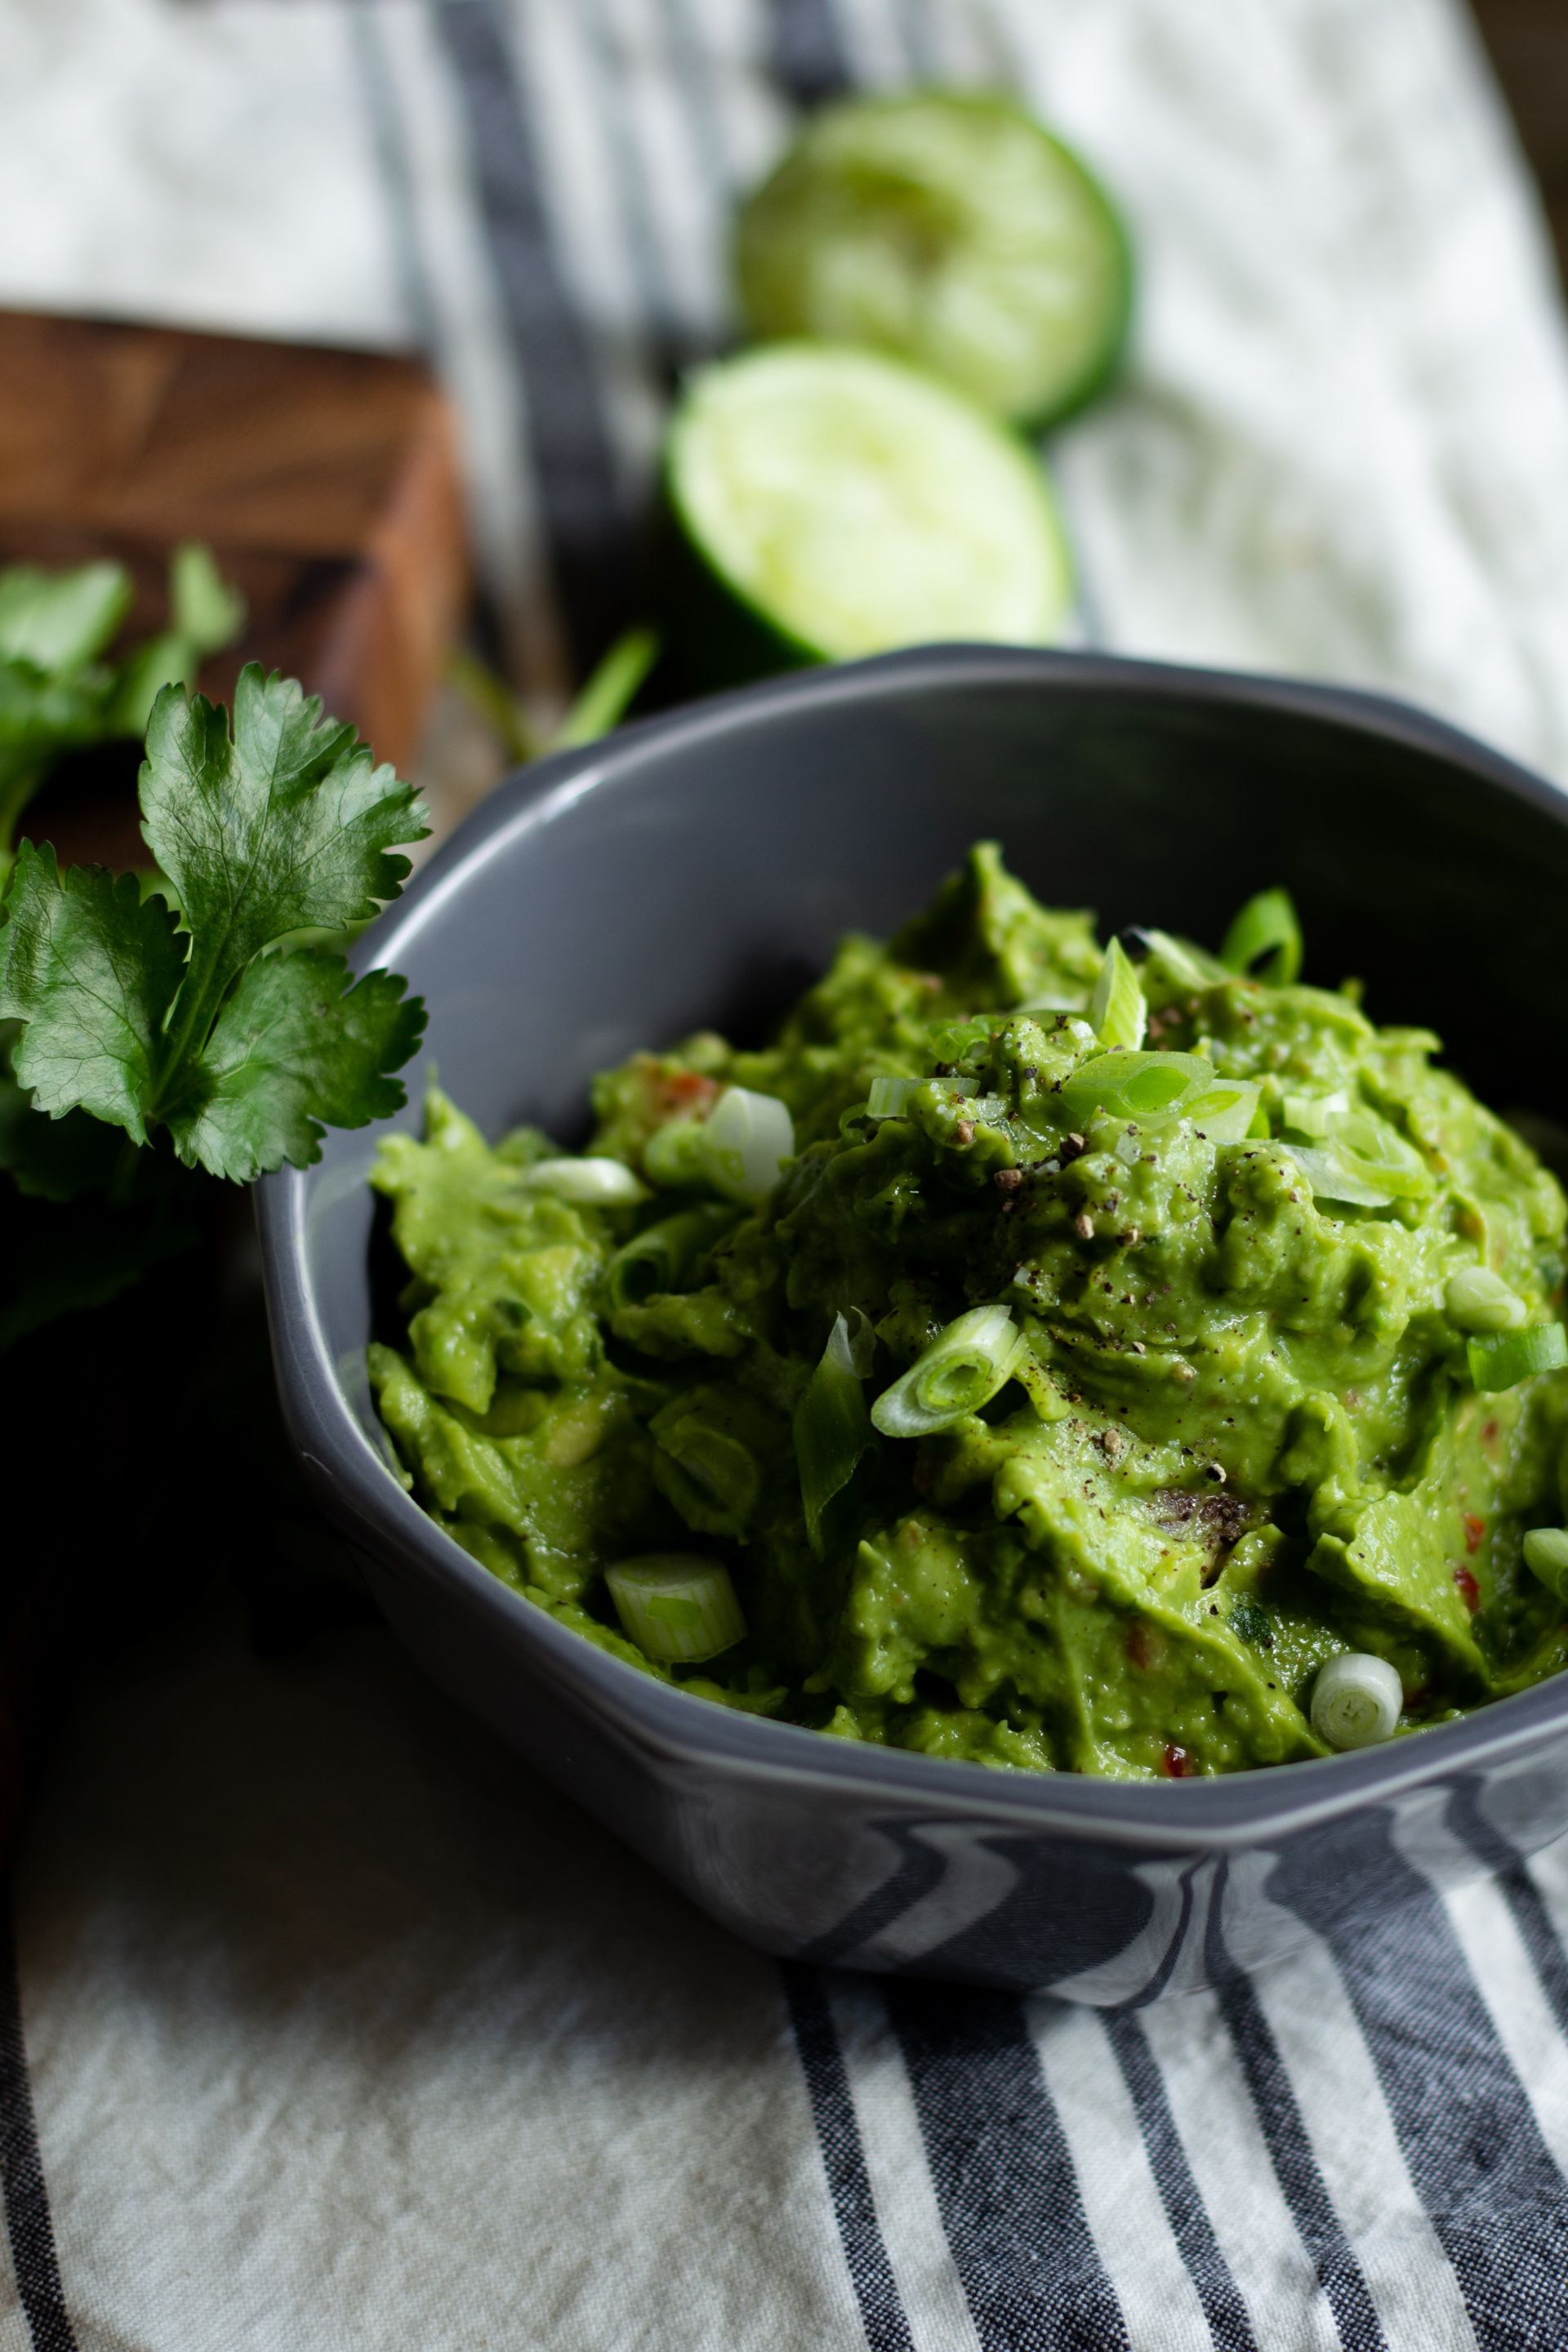 Your New Favorite Guacamole with a Local Touch